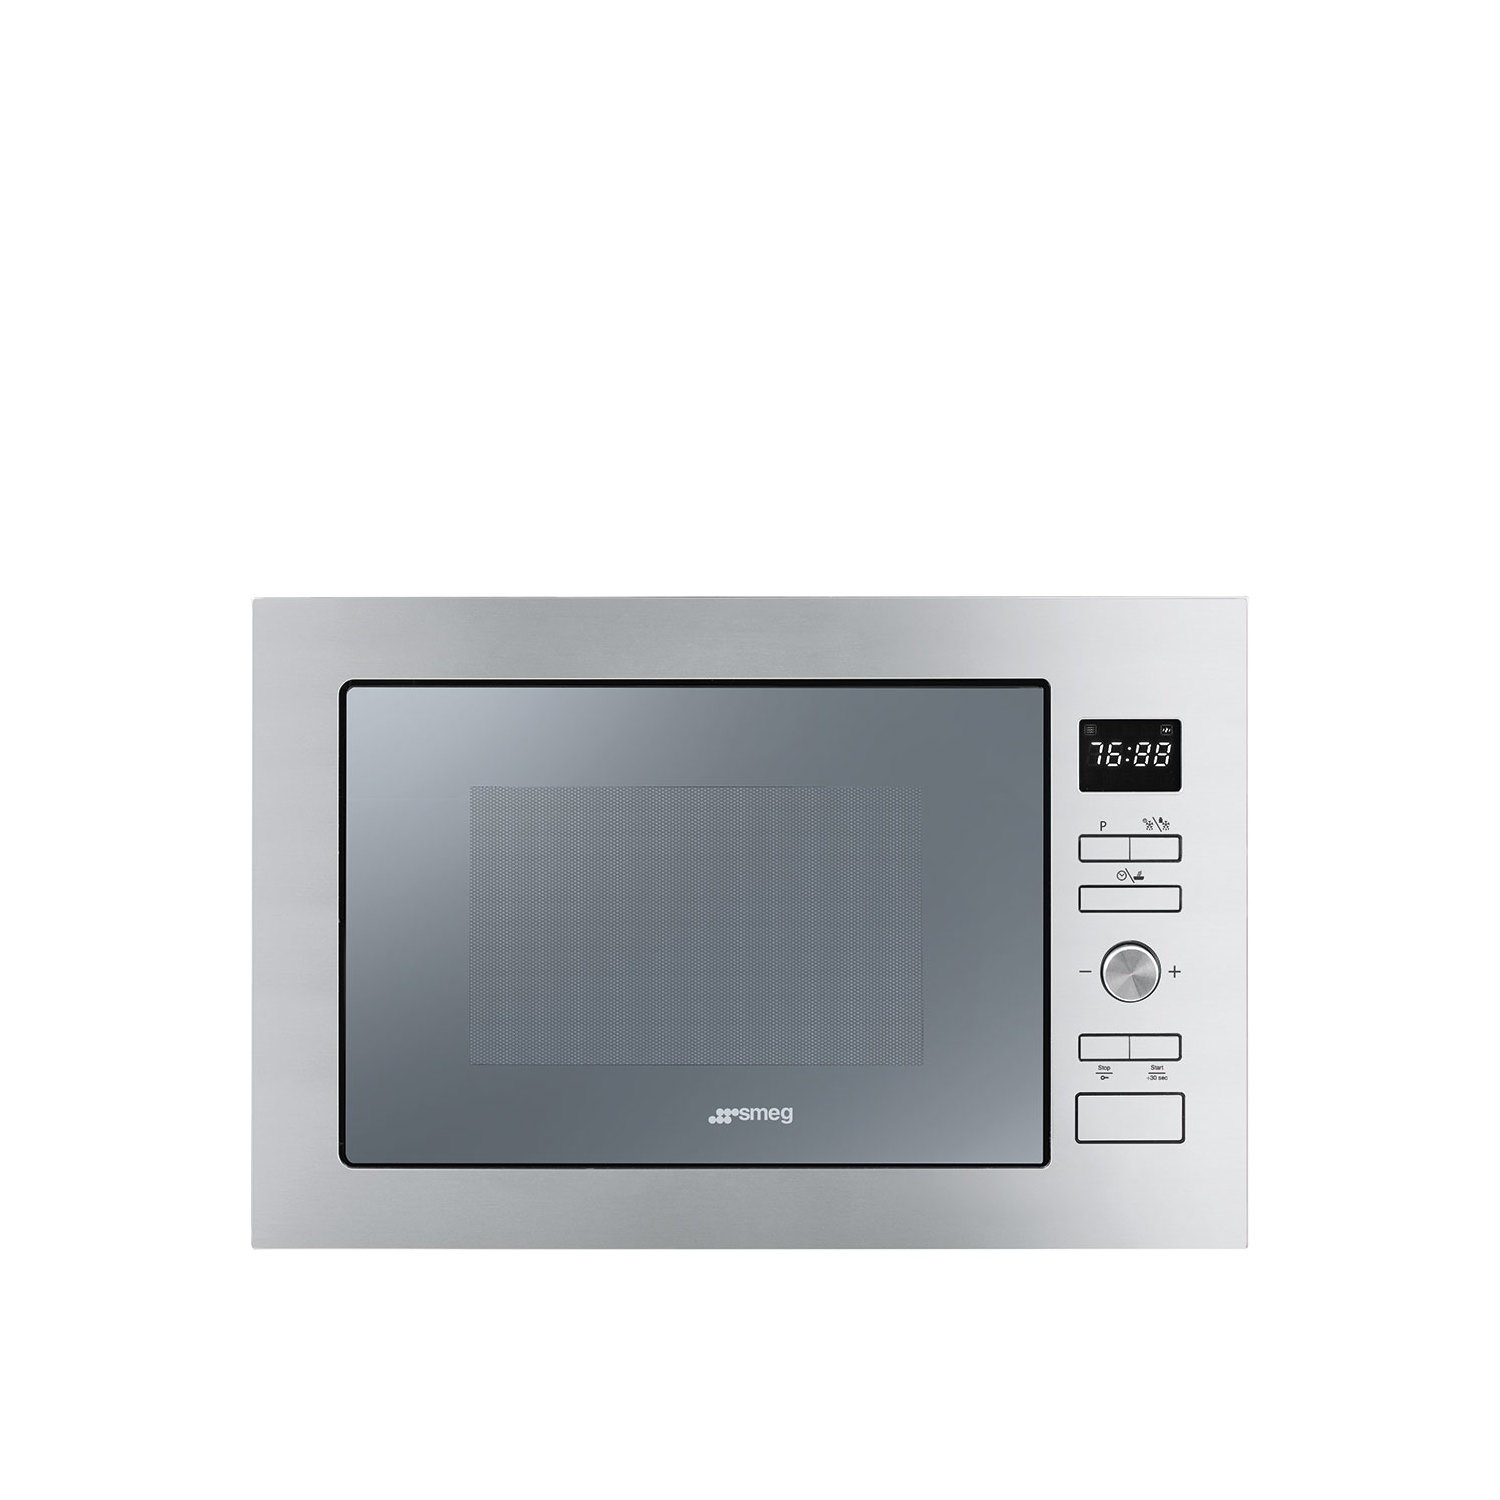 Refurbished Smeg Cucina FMI425S Built In 25L with Grill 900W Microwave Silver Glass